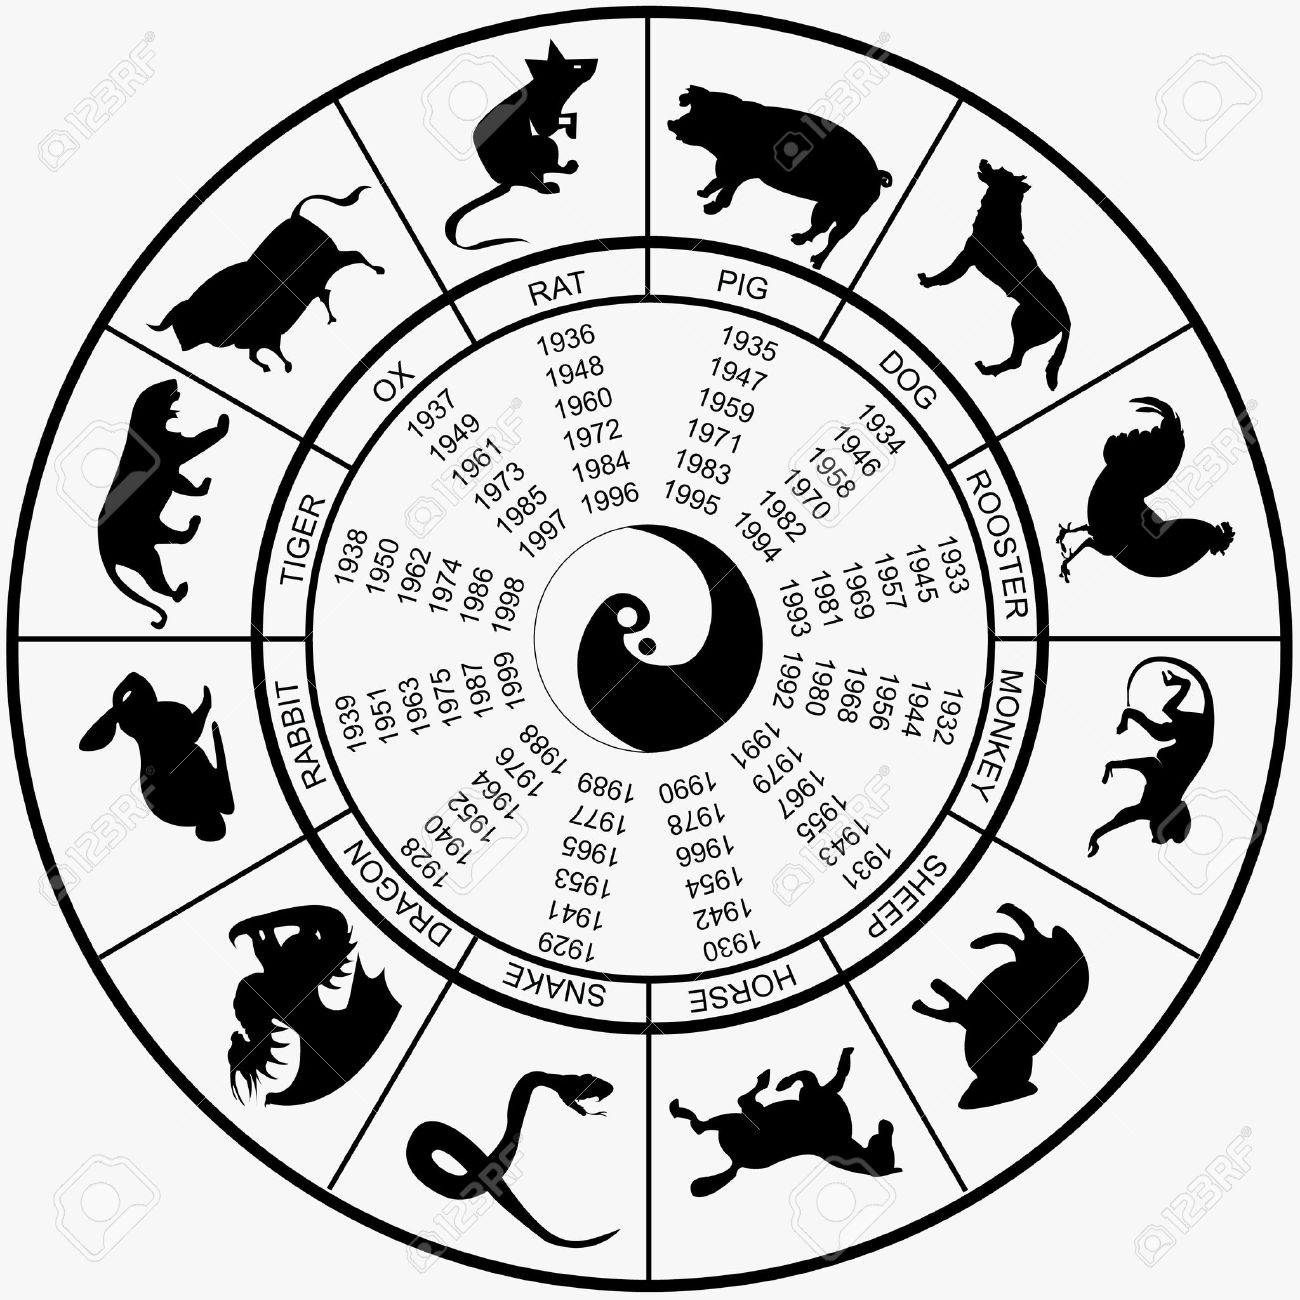 Vector Illustration Of A Chinese Horoscope Wheel With Years Chinese Zodiac Calendar Wheel